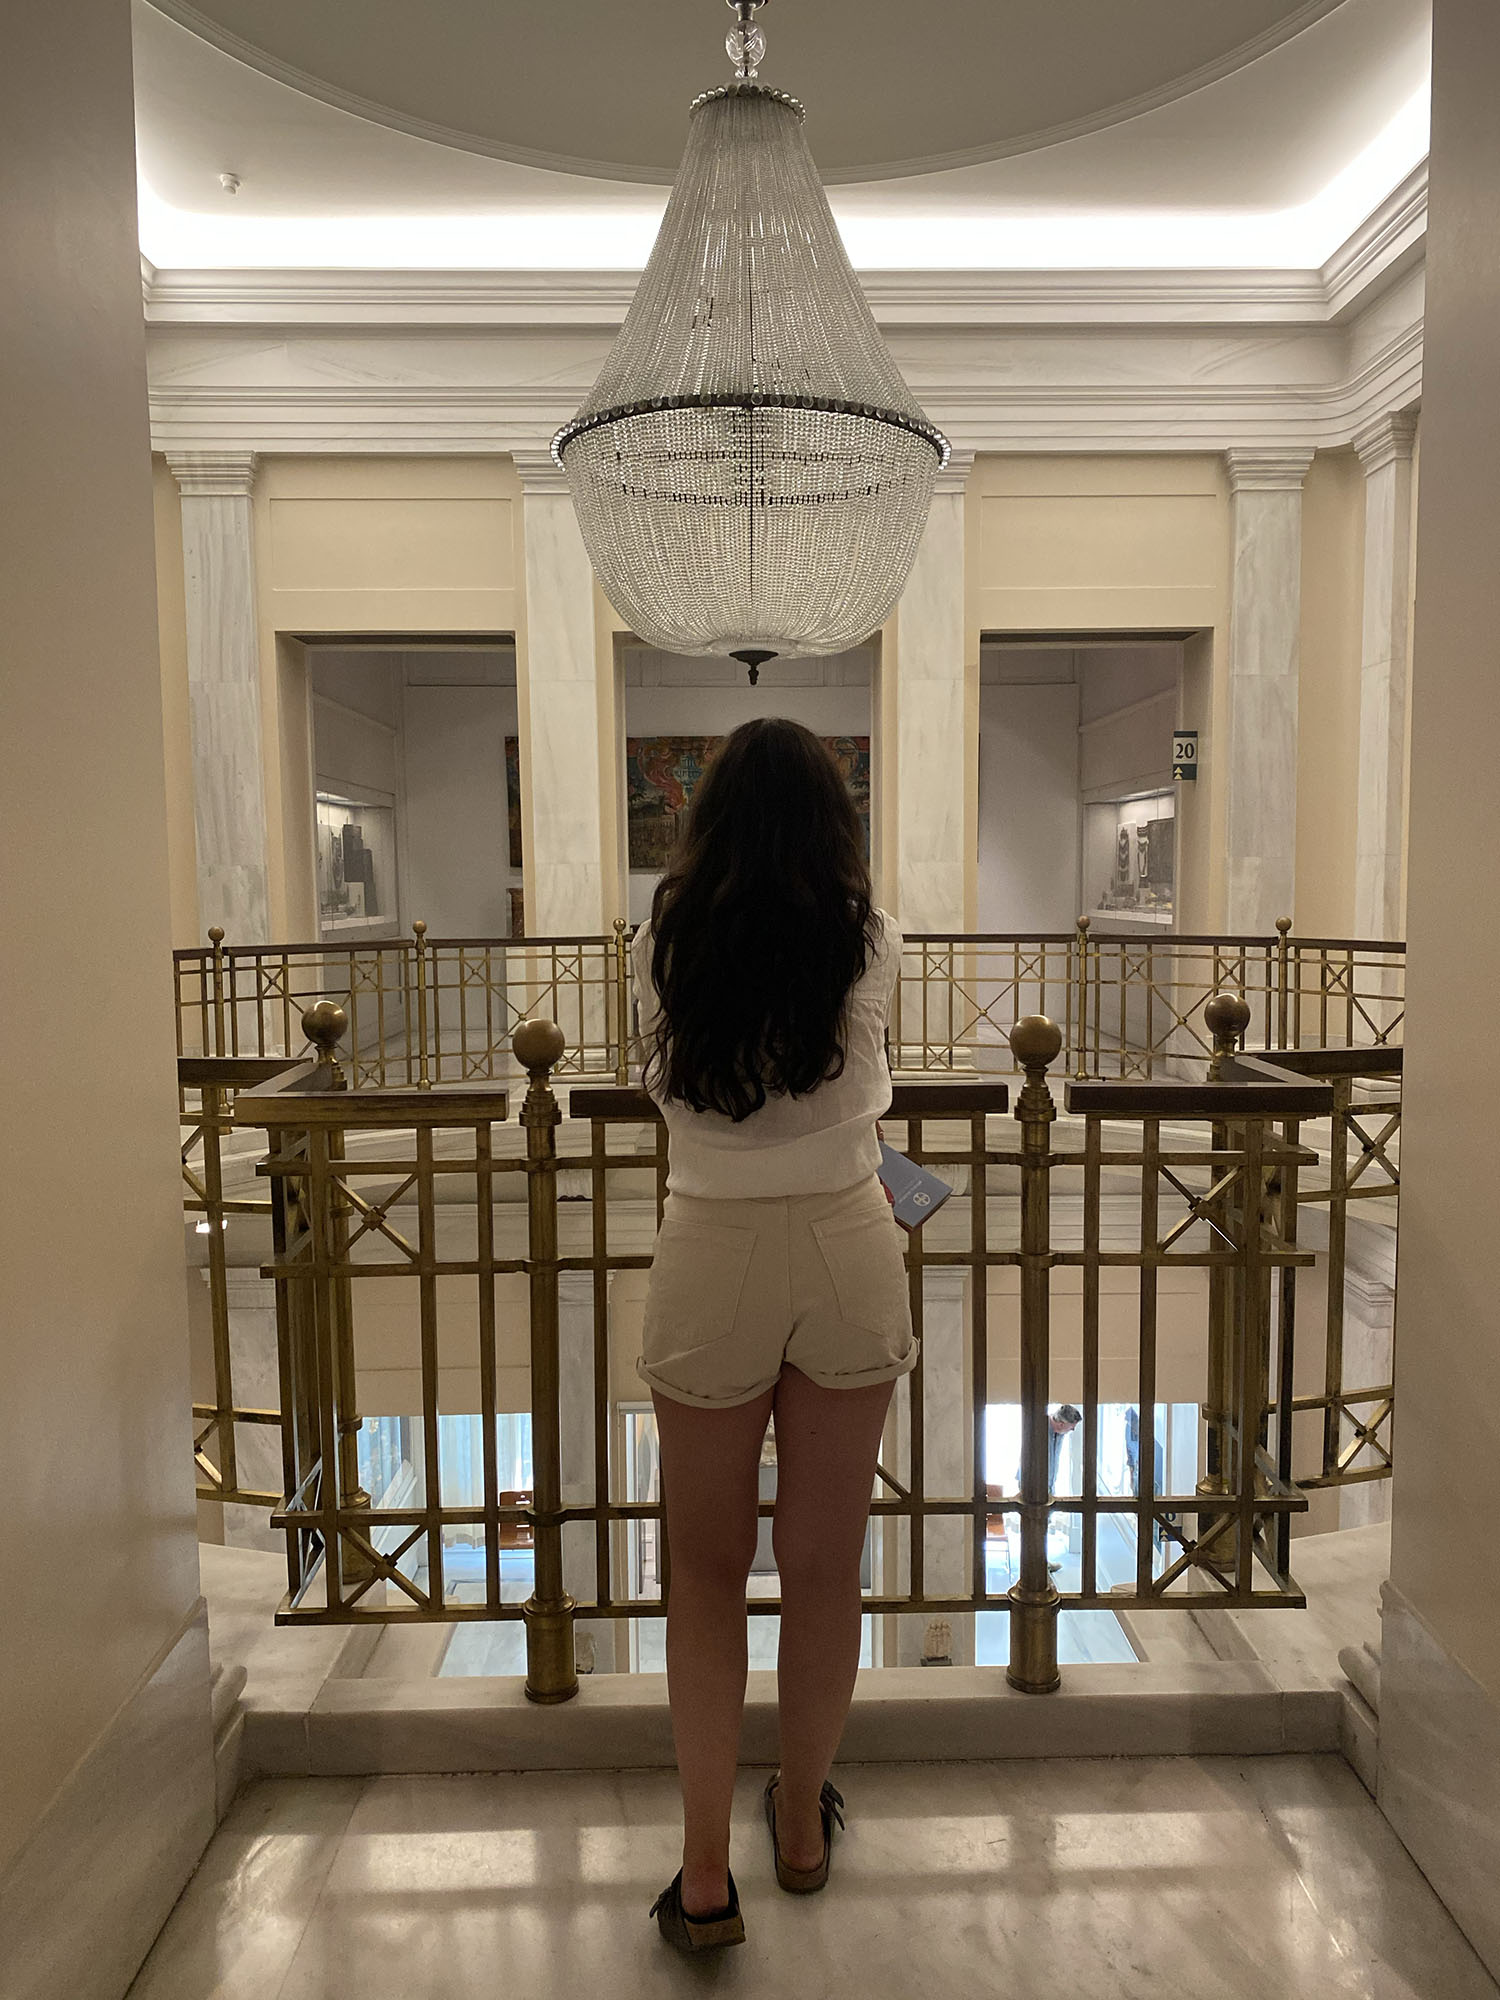 Coco & Vera - Cee Fardoe looks over the chandelier at the Benaki Museum in Athens